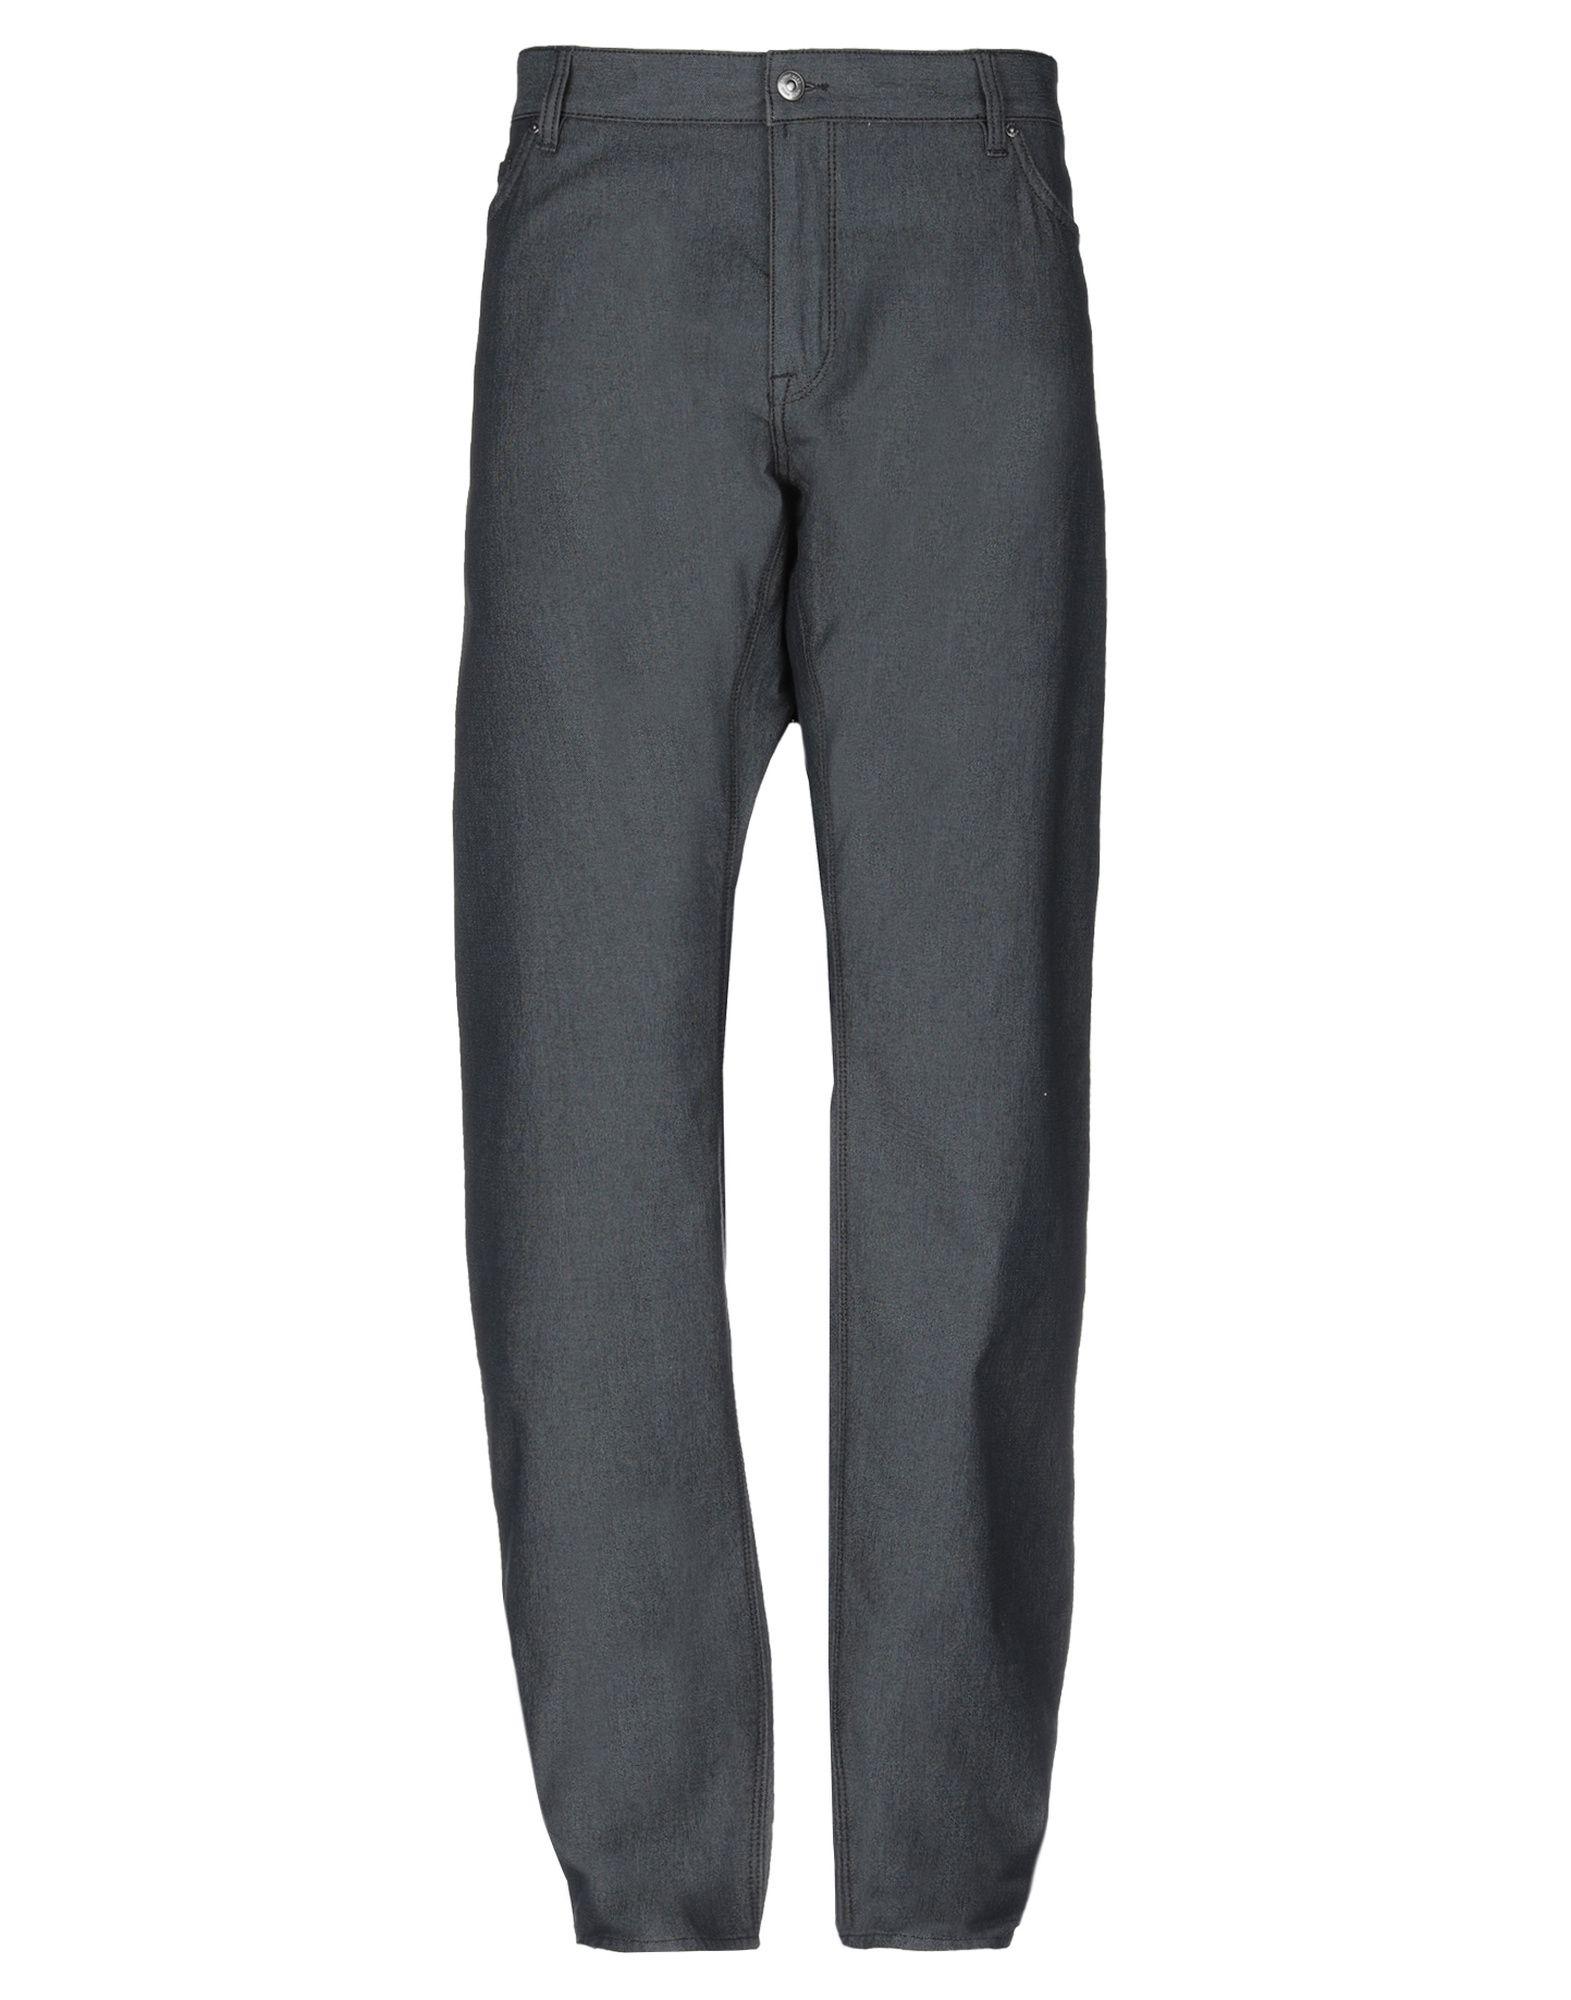 BOSS Synthetic Casual Pants in Black for Men - Lyst